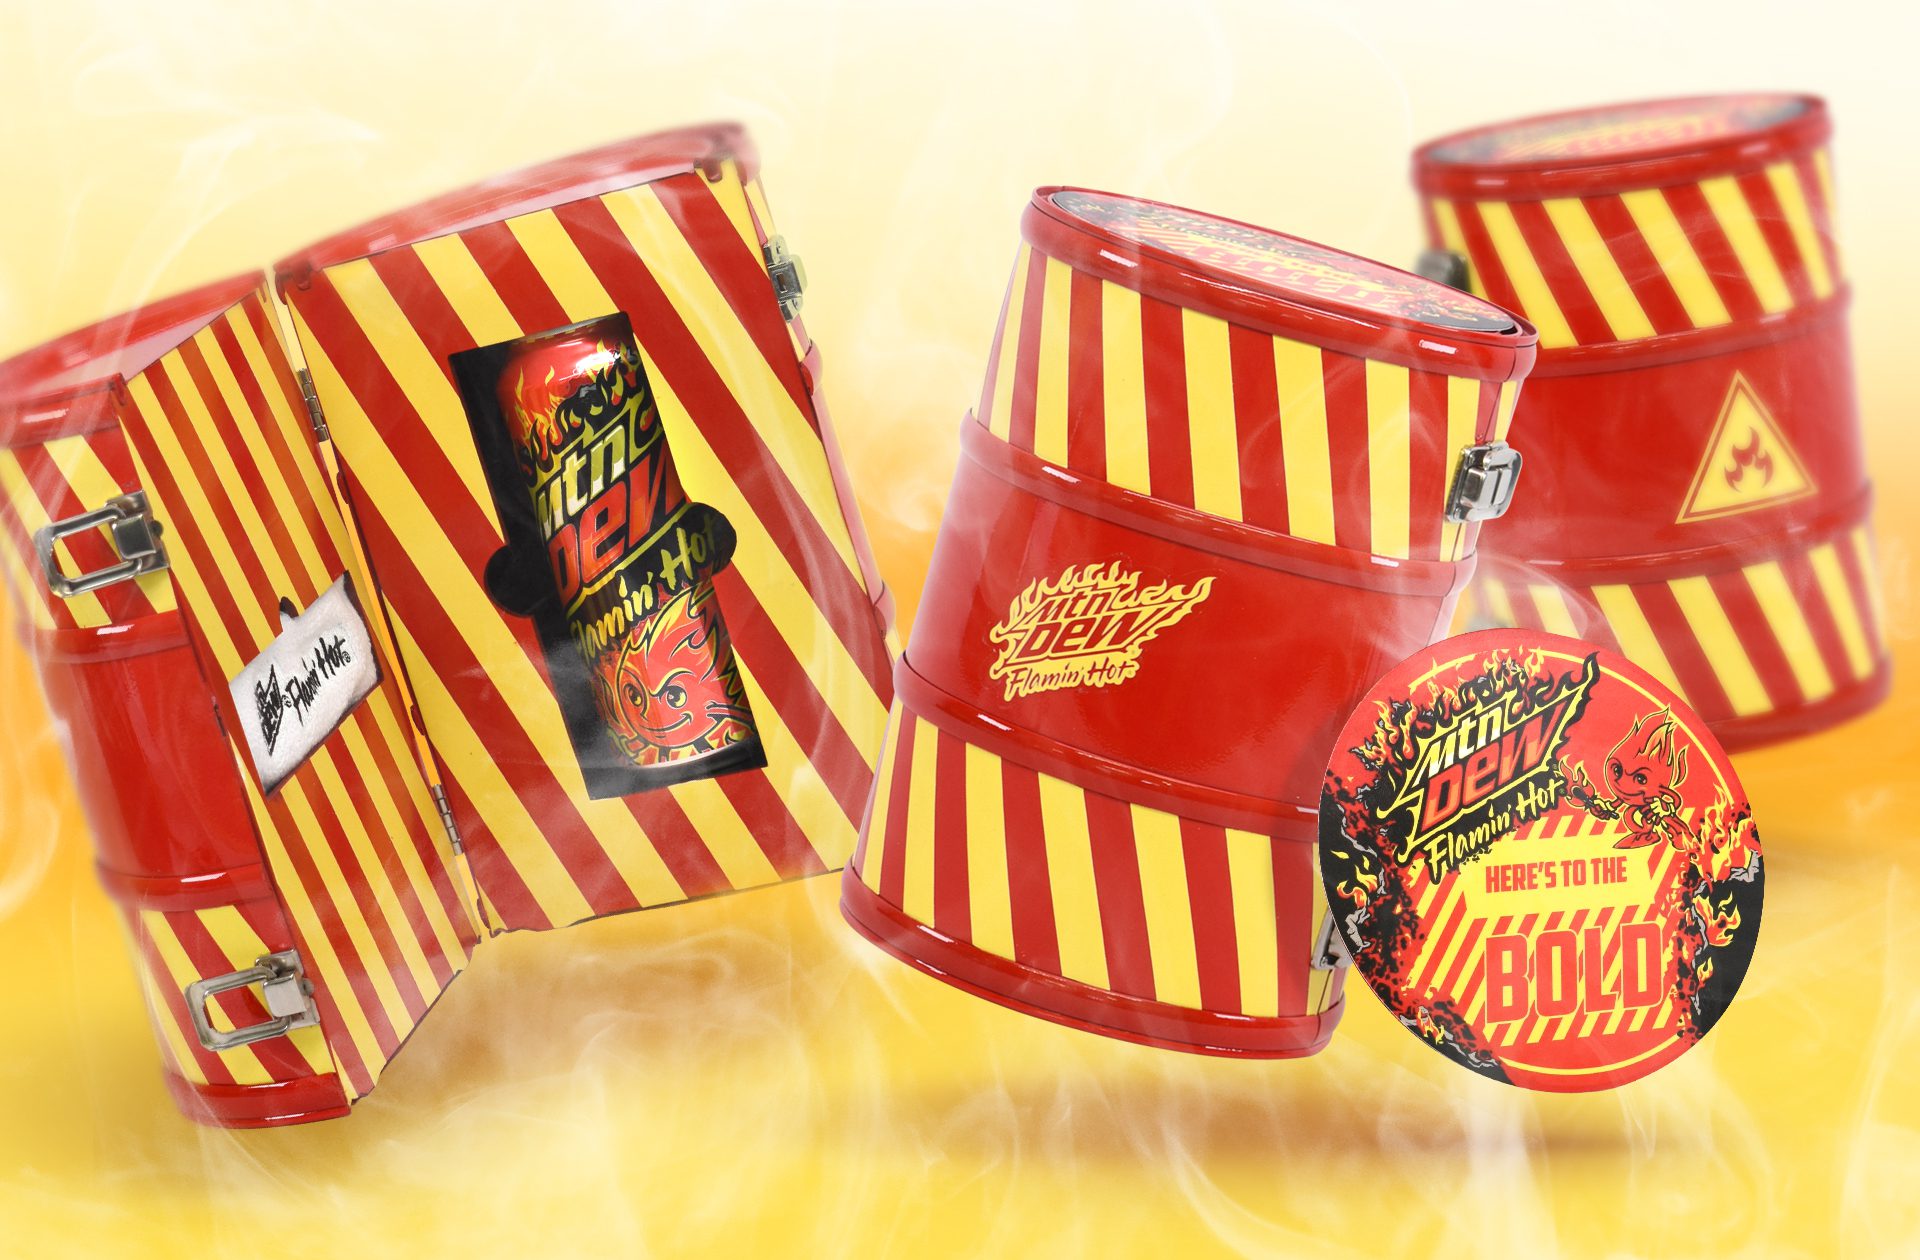 Photograph of three ‘fire retardant’ case themed influencer unboxing experience kits promoting the limited edition flavor FLAMIN HOT Mountain Dew, featuring a custom headband and note.